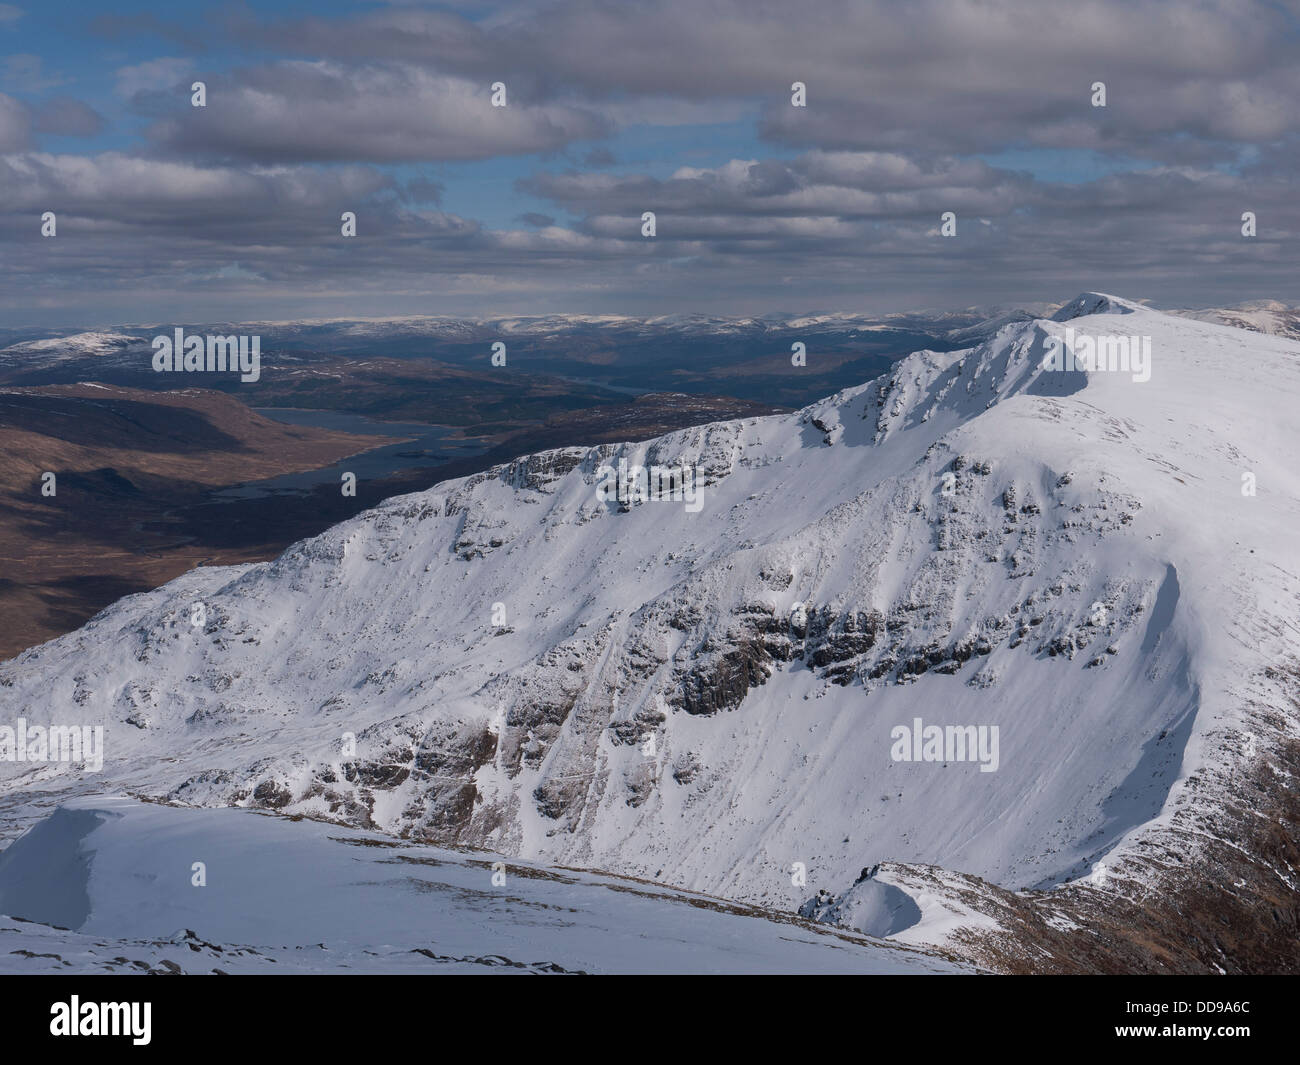 View towards the snowy mountain summit of Spidean Mialach in the Glenquoich Forest with Loch Loyne in the distance, Scotland UK Stock Photo